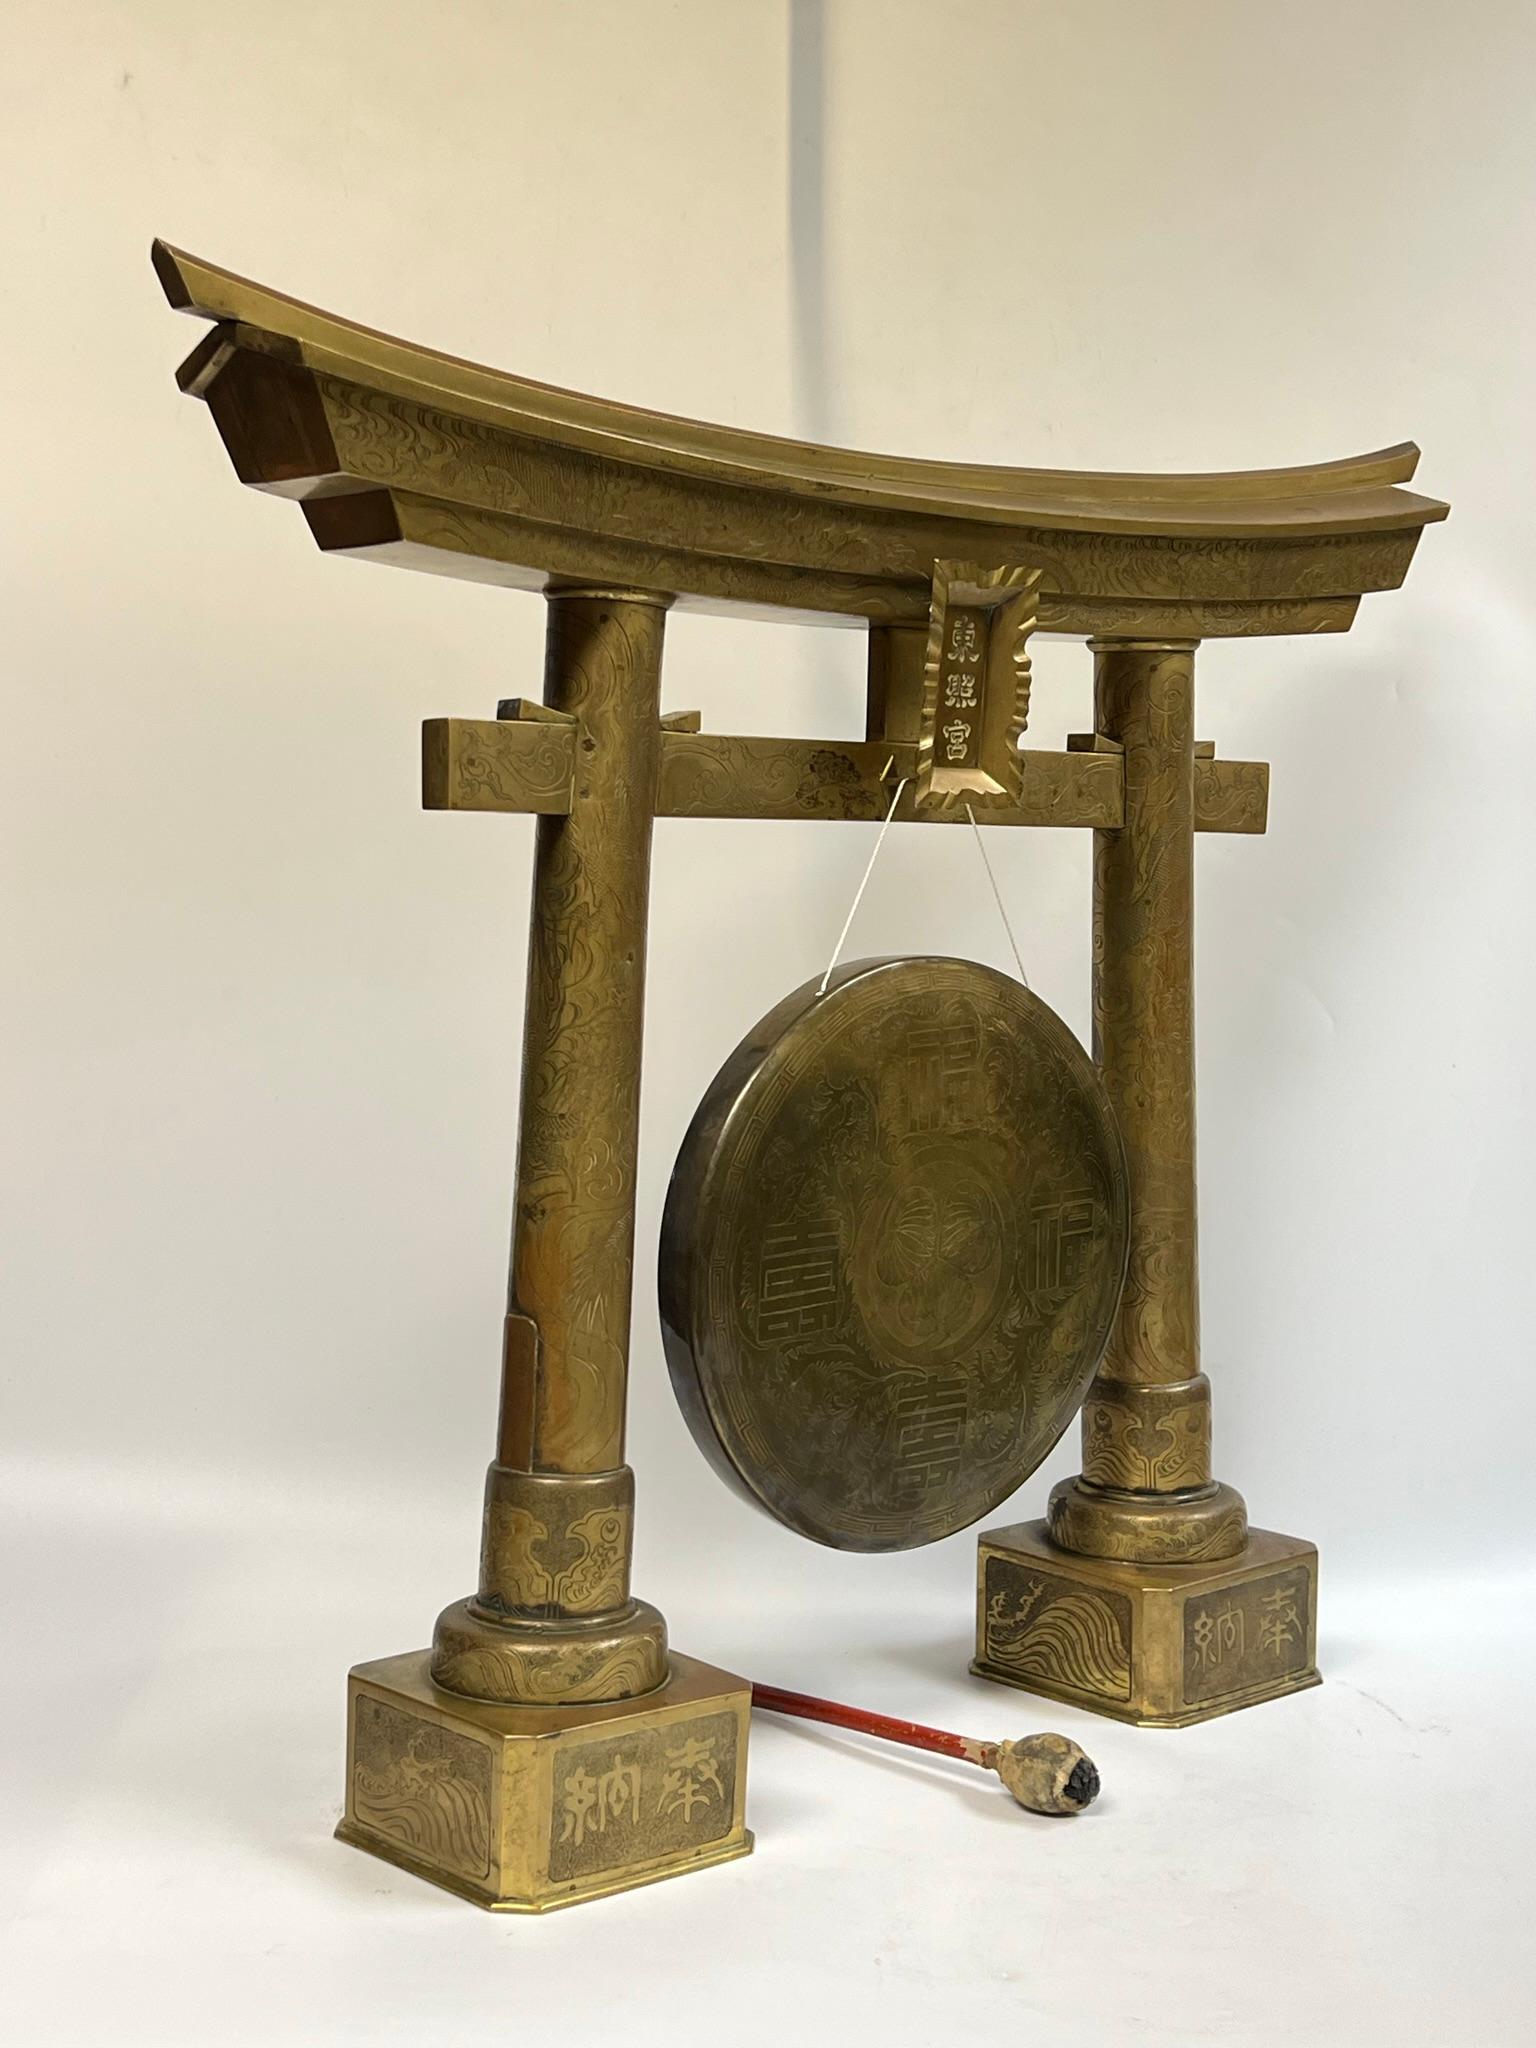 Unique and impressive 19th century Japanese Toshogu shrine gong honoring Tokugawa leyasu, founder of the Tokugawa Shogunate that ruled from 1603 to 1867, known as the Edo period.  With antique mallet, removable plate that reads Toshogu Shrine, plus